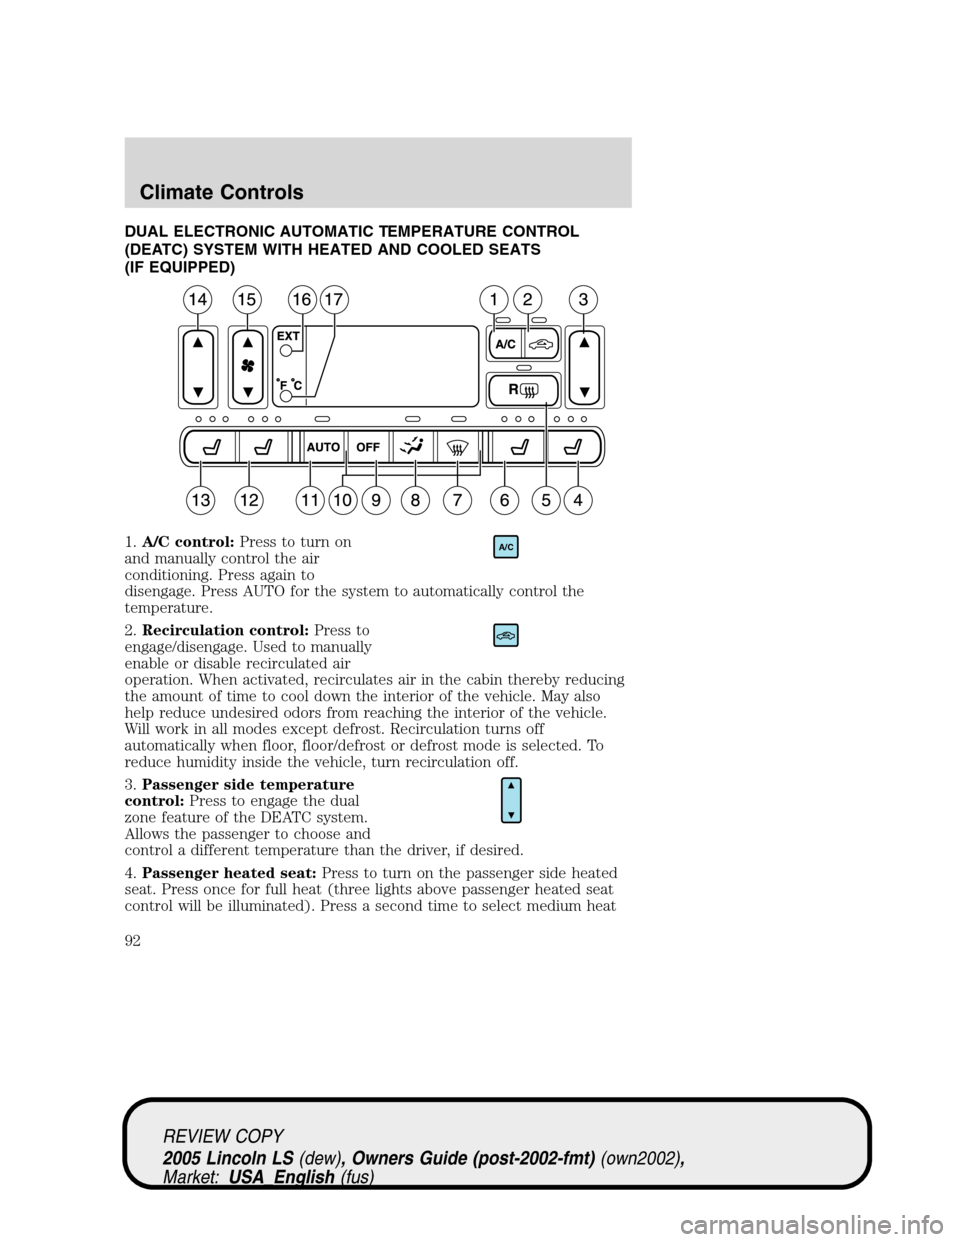 LINCOLN LS 2005 User Guide DUAL ELECTRONIC AUTOMATIC TEMPERATURE CONTROL
(DEATC) SYSTEM WITH HEATED AND COOLED SEATS
(IF EQUIPPED)
1.A/C control:Press to turn on
and manually control the air
conditioning. Press again to
disenga